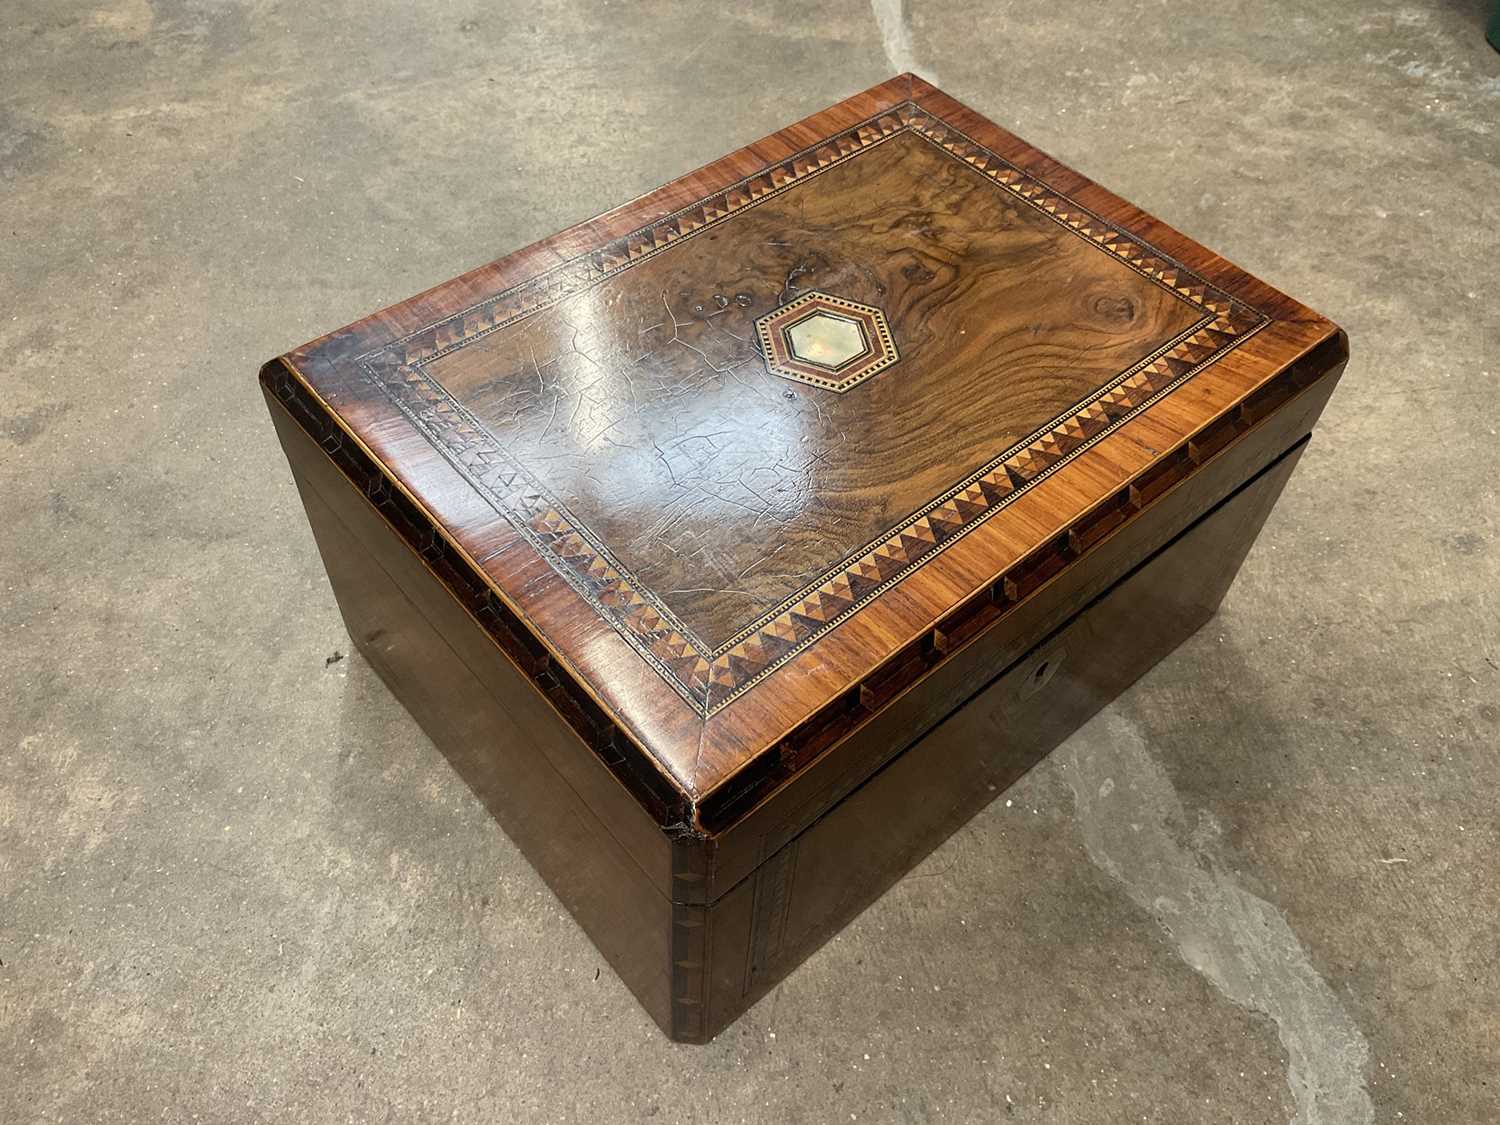 Lot 162 - Victorian inlaid walnut sewing box with contents